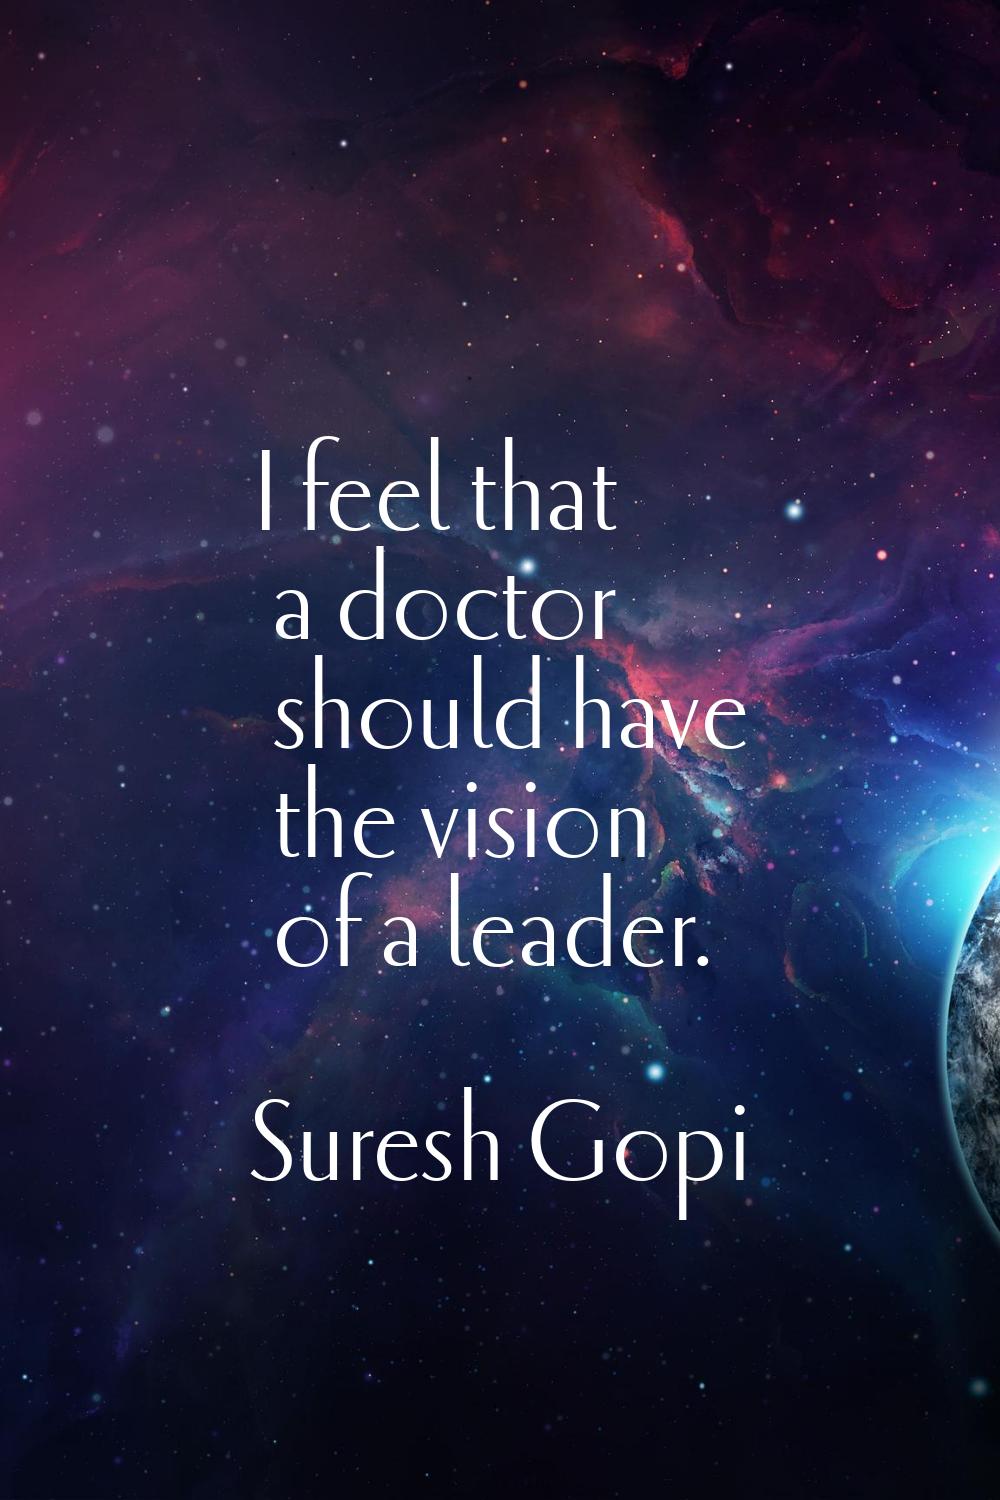 I feel that a doctor should have the vision of a leader.